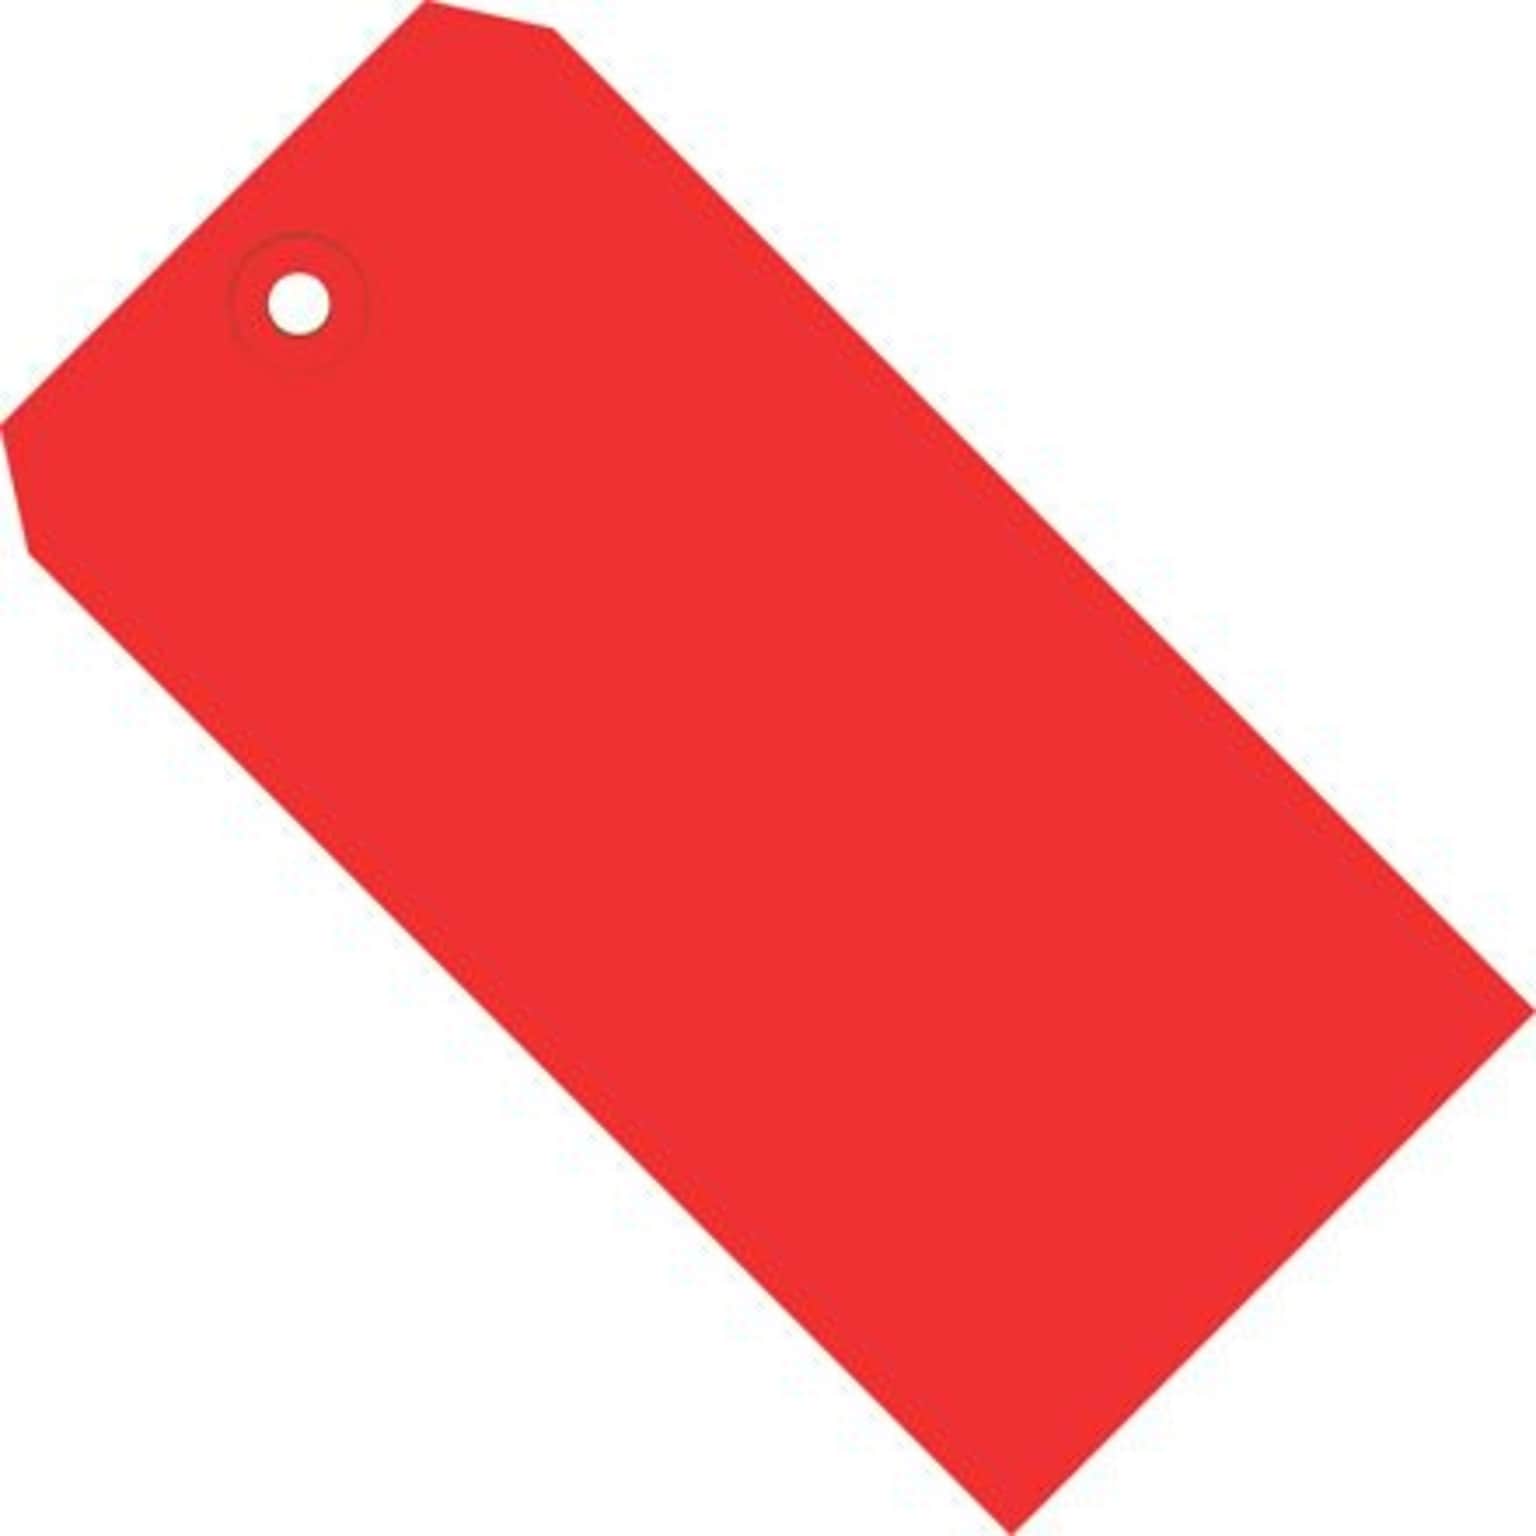 Quill Brand® Shipping Tag, 13 Pt, 2 3/4 x 1 3/8, Red, 1000/Case (G11011E)